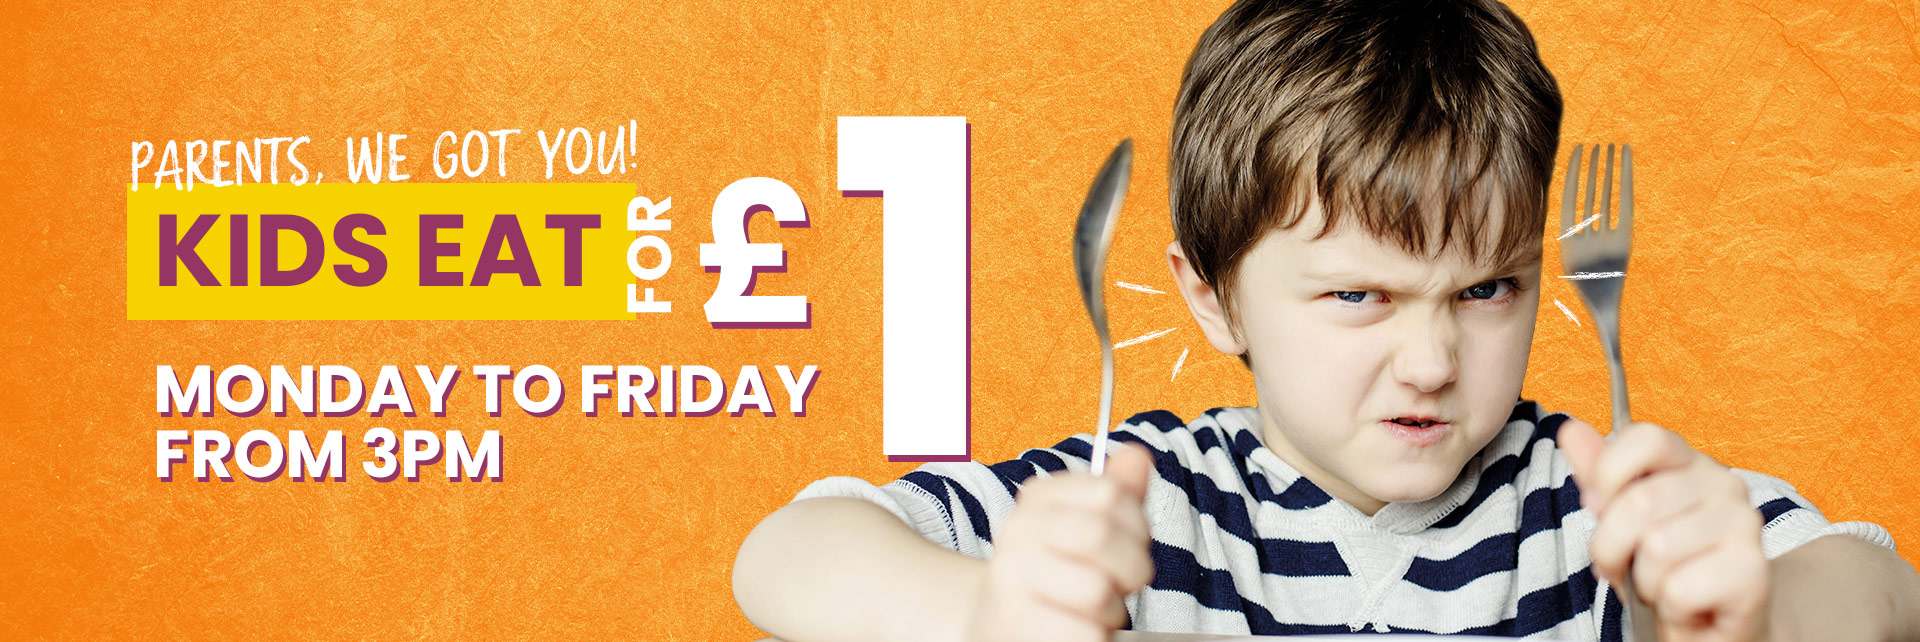 Image promoting “Kids Eat for £1” offer at Sizzling Pubs